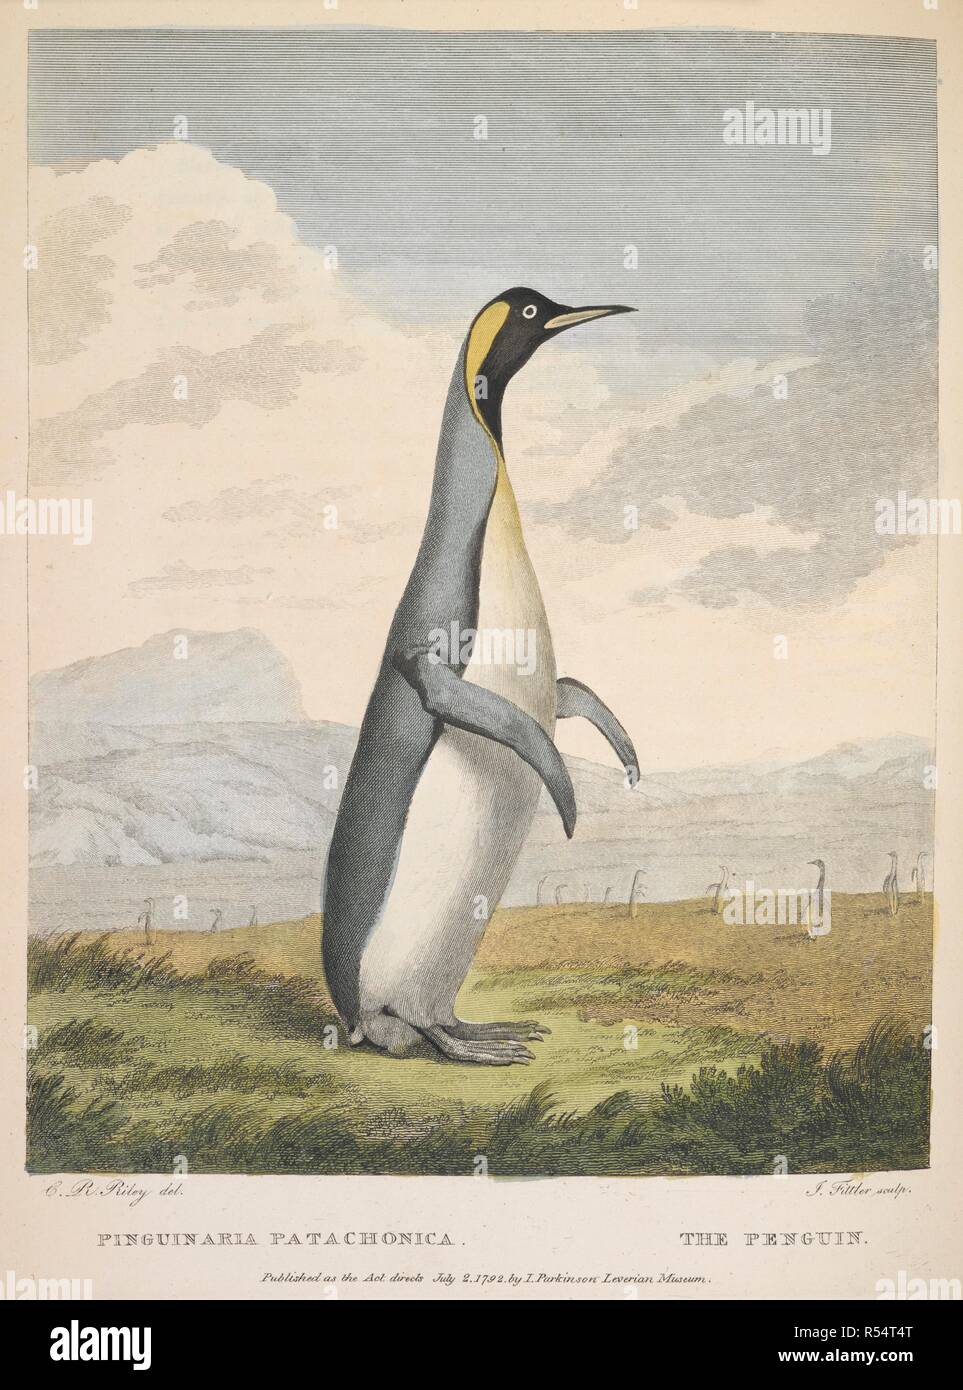 Pinguinaria Patachonica. The Penguin. Musei Leveriani explicatio, Anglica et Latina (containing select specimens from the museum of ... Sir A. Lever), etc. vol. 1, vol. 2, pp. 1-48. Impensis Jacobi Parkinson: [London,] 1792, 96. 1792. Source: 40.e.15 plate 147. Author: Ryley, Charles Reuben. SHAW GEORGE. Stock Photo